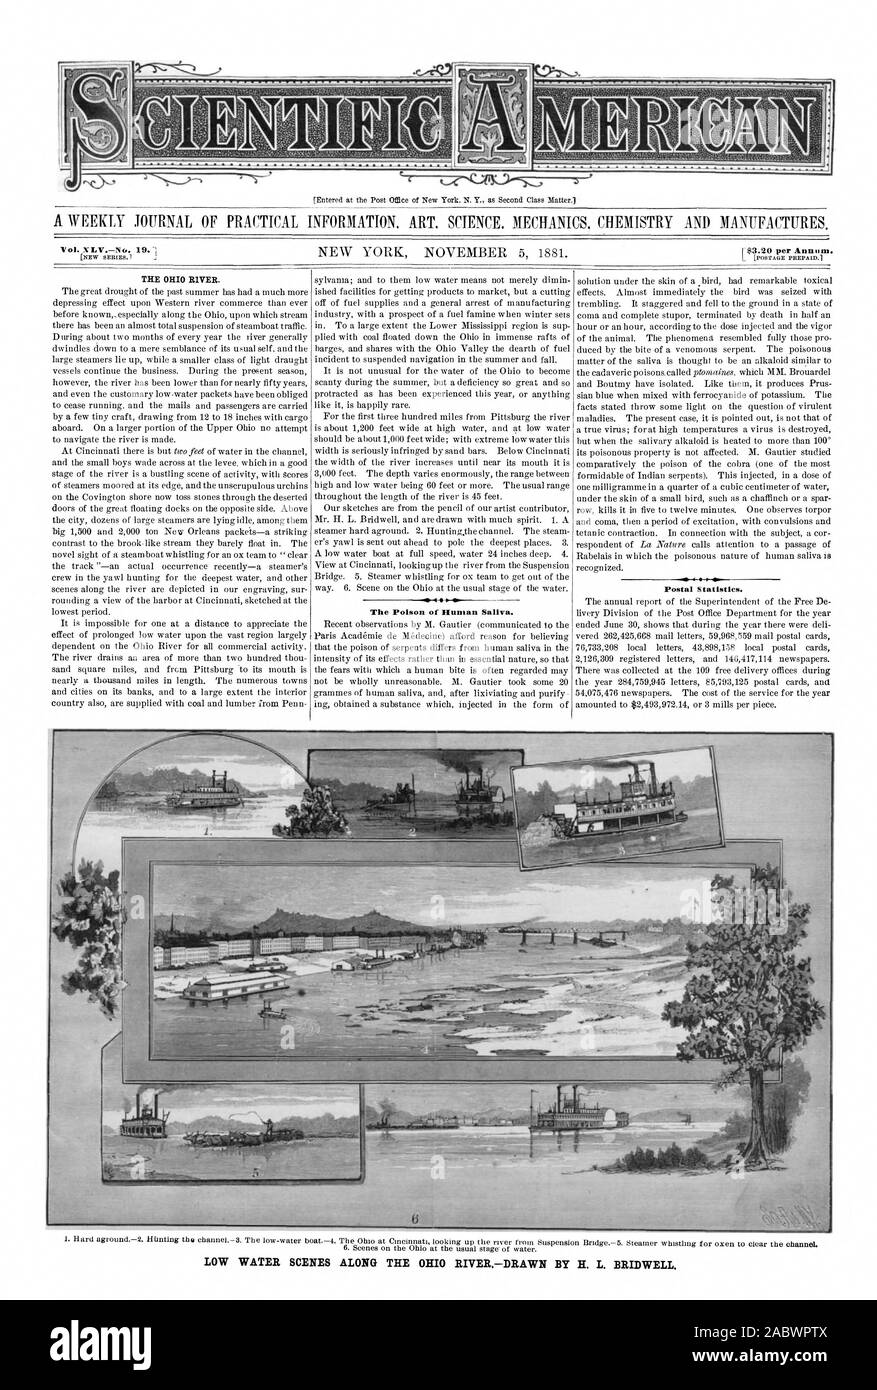 Entered at the Post Office of New York N. Y. as Second Class Matter. Vol. NLVNo. 19.1 THE OHIO RIVER. The Poison of Unman Saliva. LOW WATER SCENES ALONG THE OHIO RIVERDRAWN BY H. L. BRIDWELL., scientific american, 1881-11-05 Stock Photo